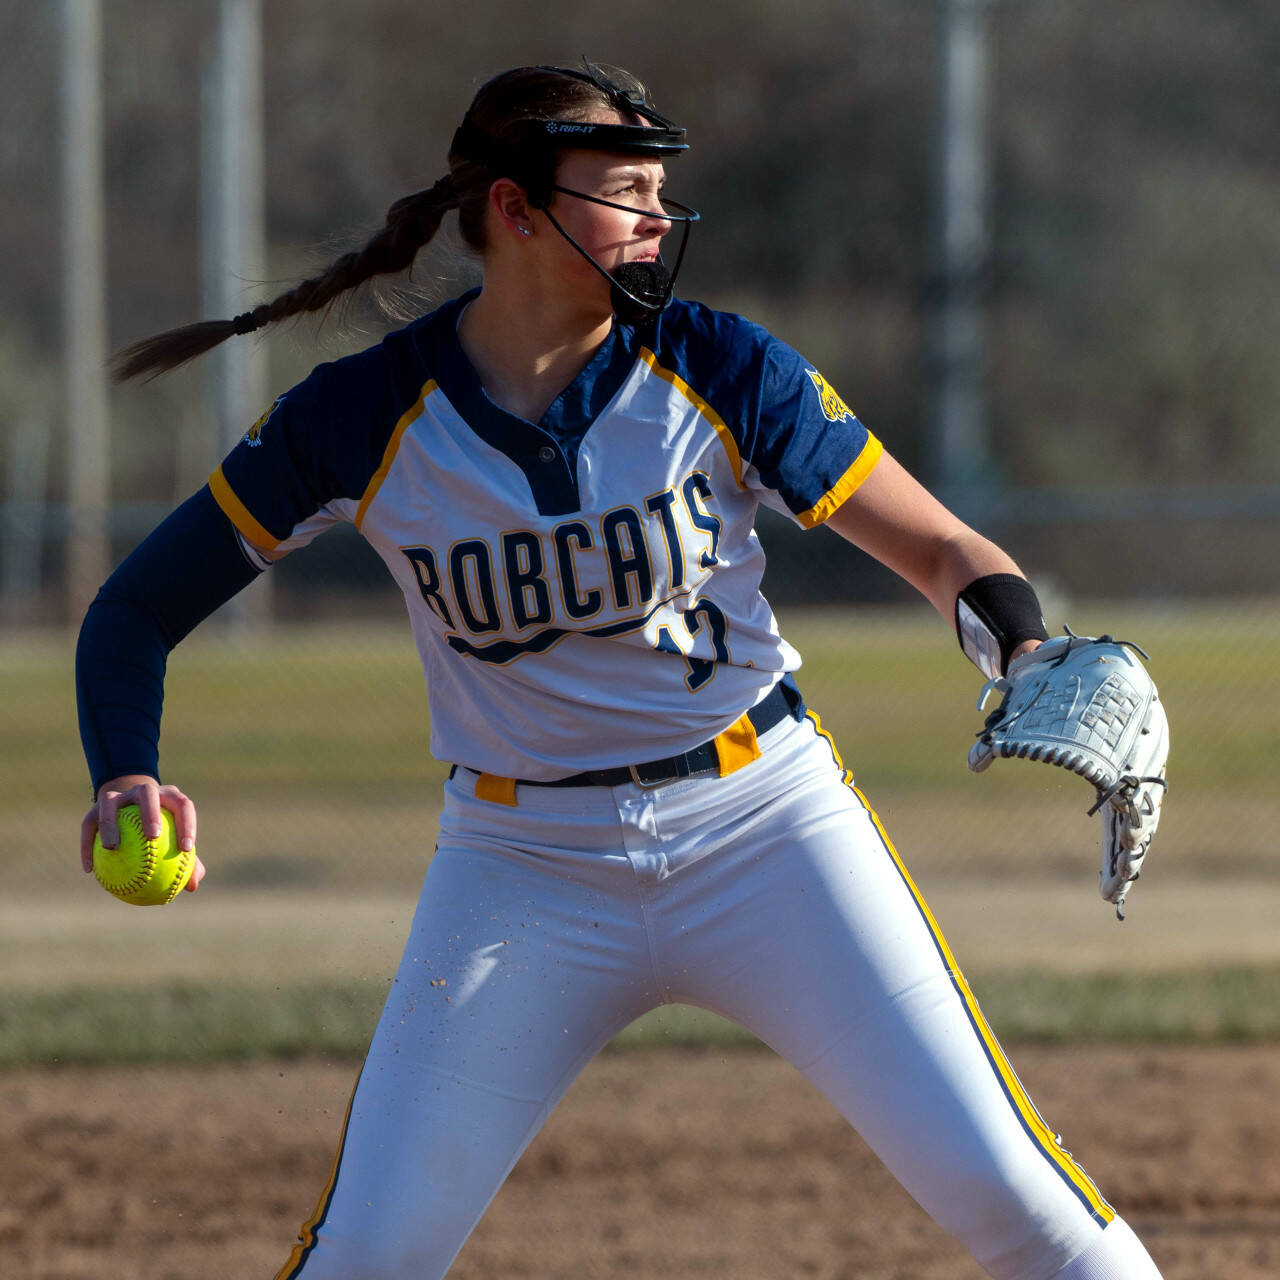 PHOTO BY FOREST WORGUM Aberdeen sophomore pitcher Lilly Camp, seen here in a file photo, sparkled in the circle as the Bobcats advanced to the 2A State Tournament semifinals with two wins on Friday in Selah.